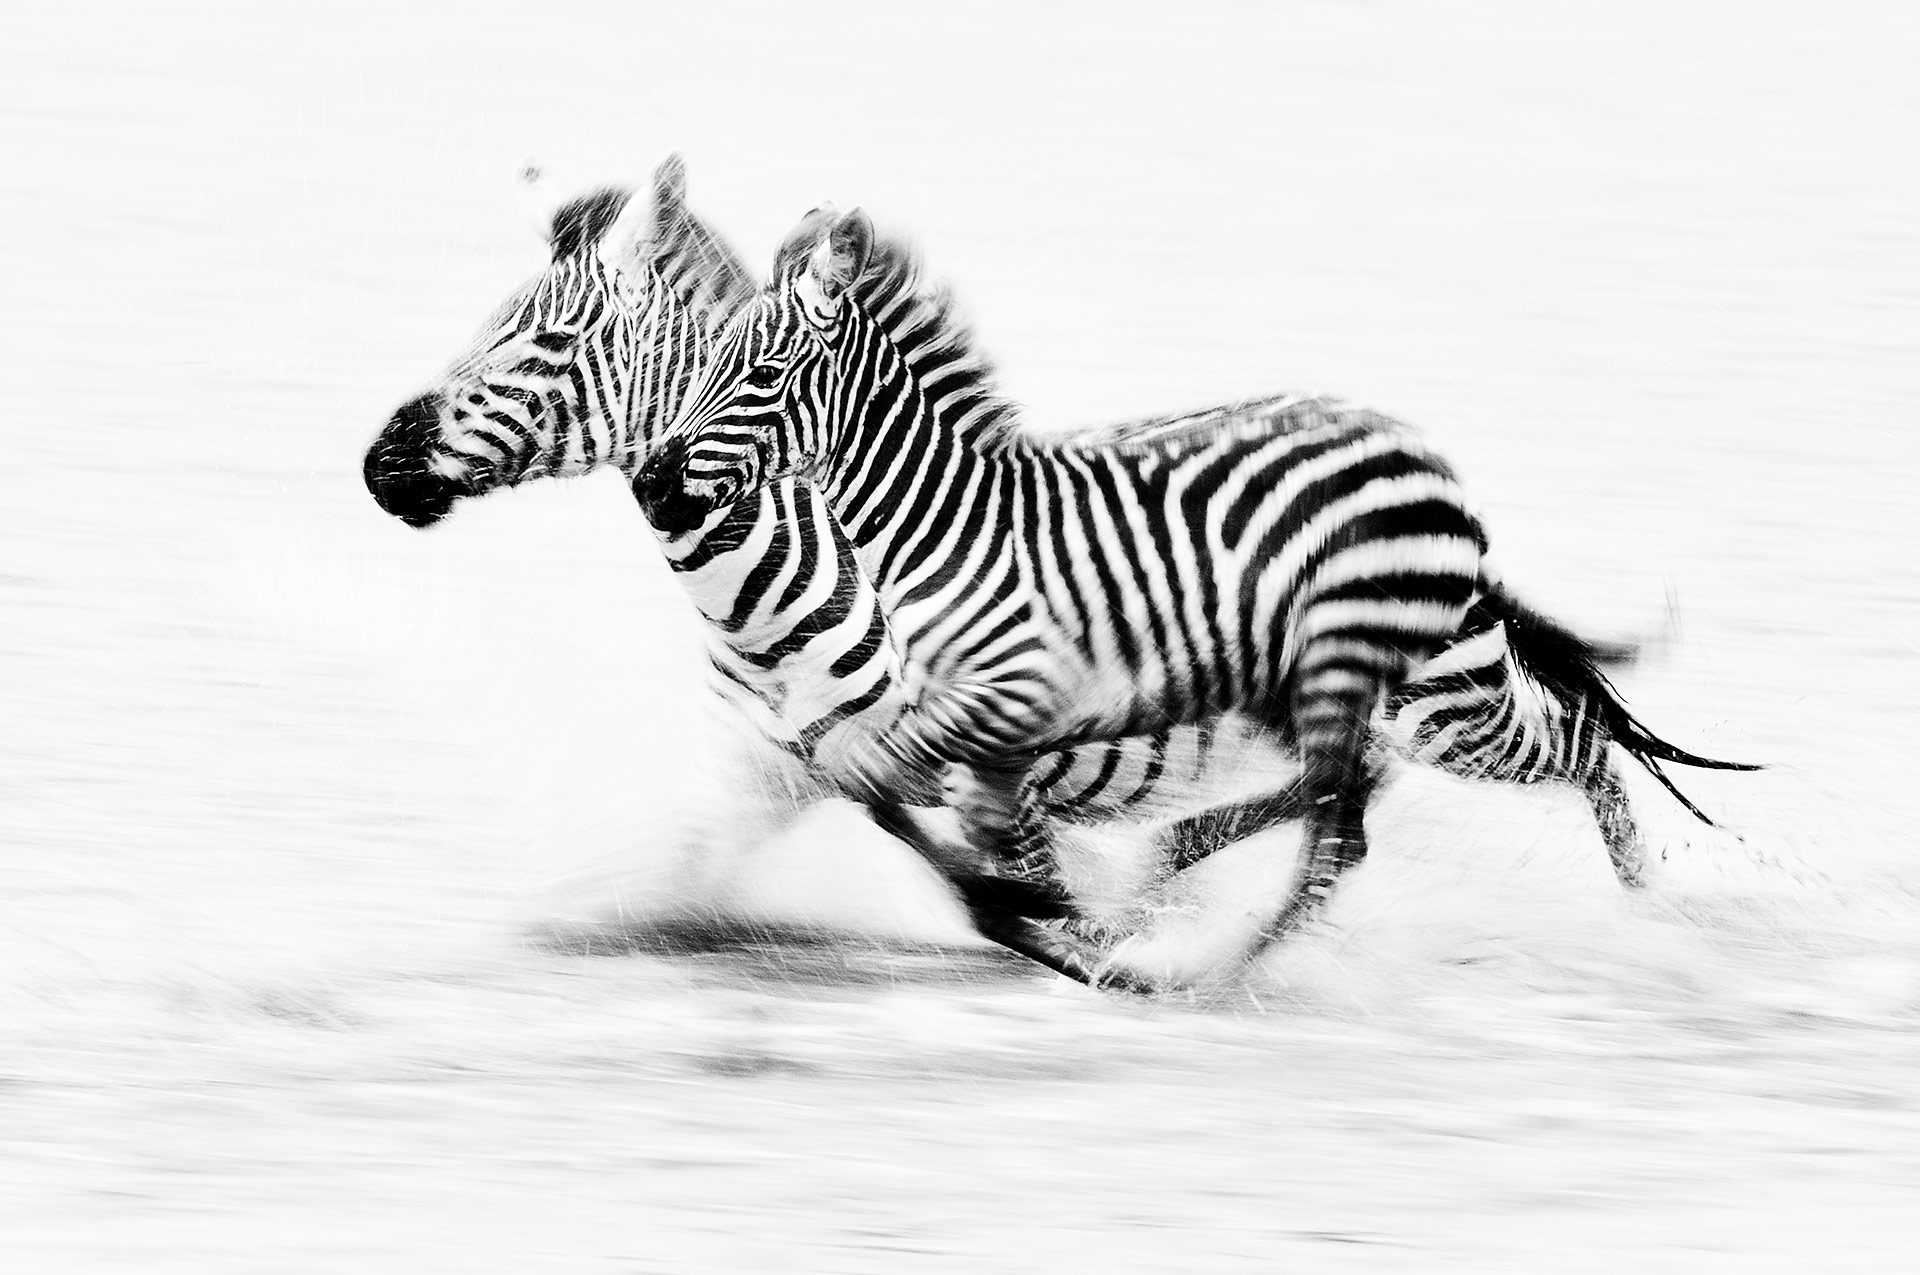 Running zebra mare with young foal